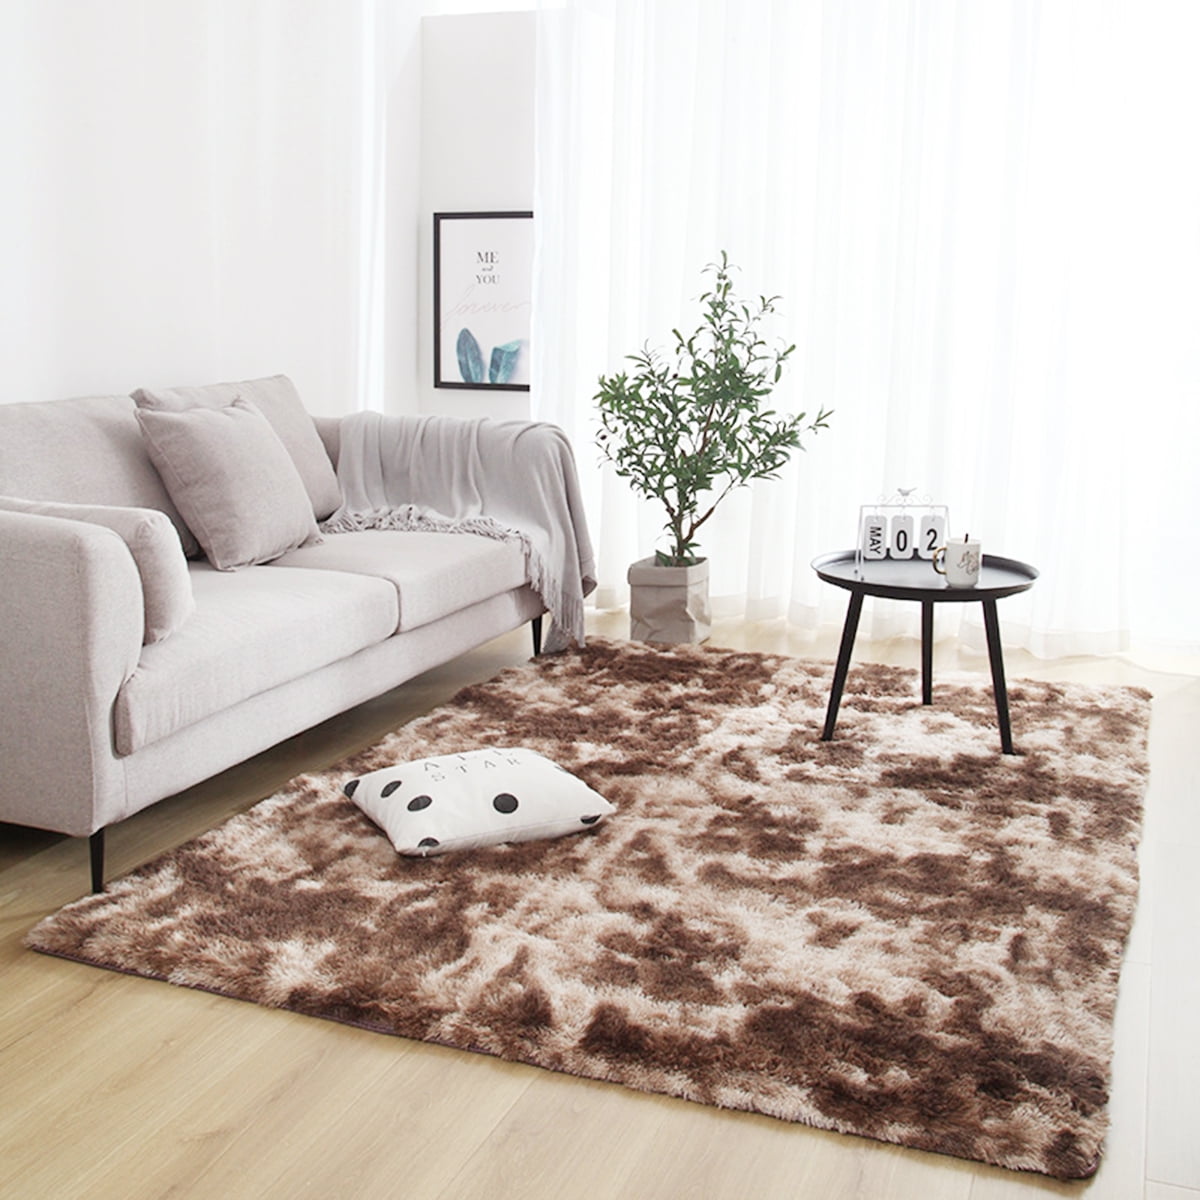 Brown MIULEE Fluffy Rug Soft Shaggy Faux Fur Area Rug Luxury Plush Rectangle Carpet for Bedroom Living Room Sofa Chair 2 x 3 Feet